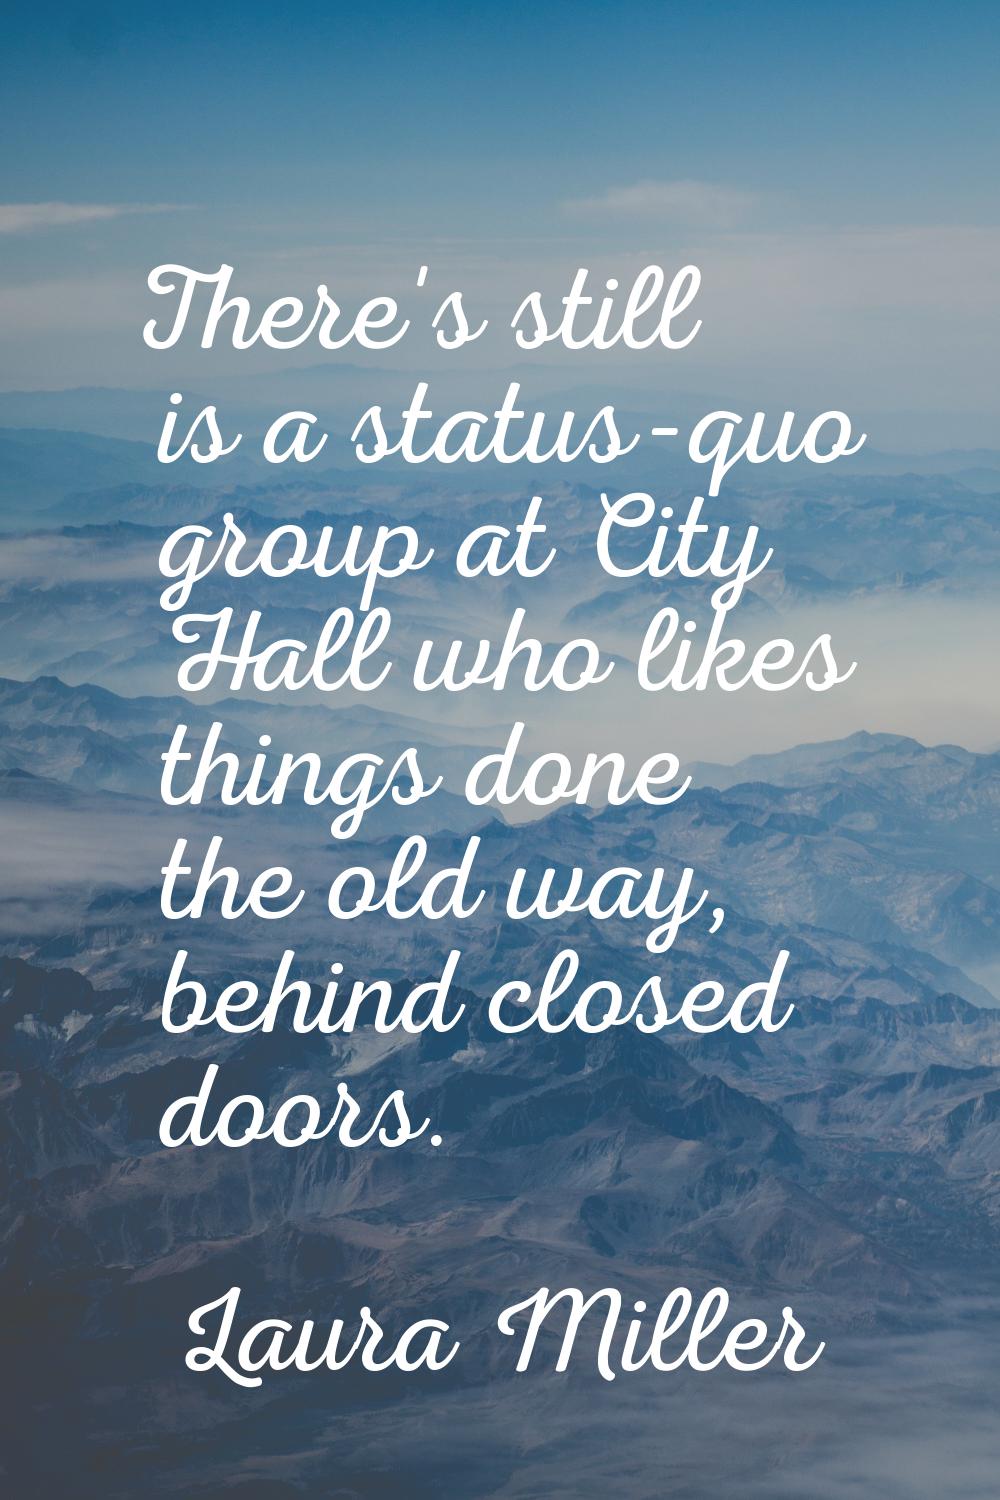 There's still is a status-quo group at City Hall who likes things done the old way, behind closed d